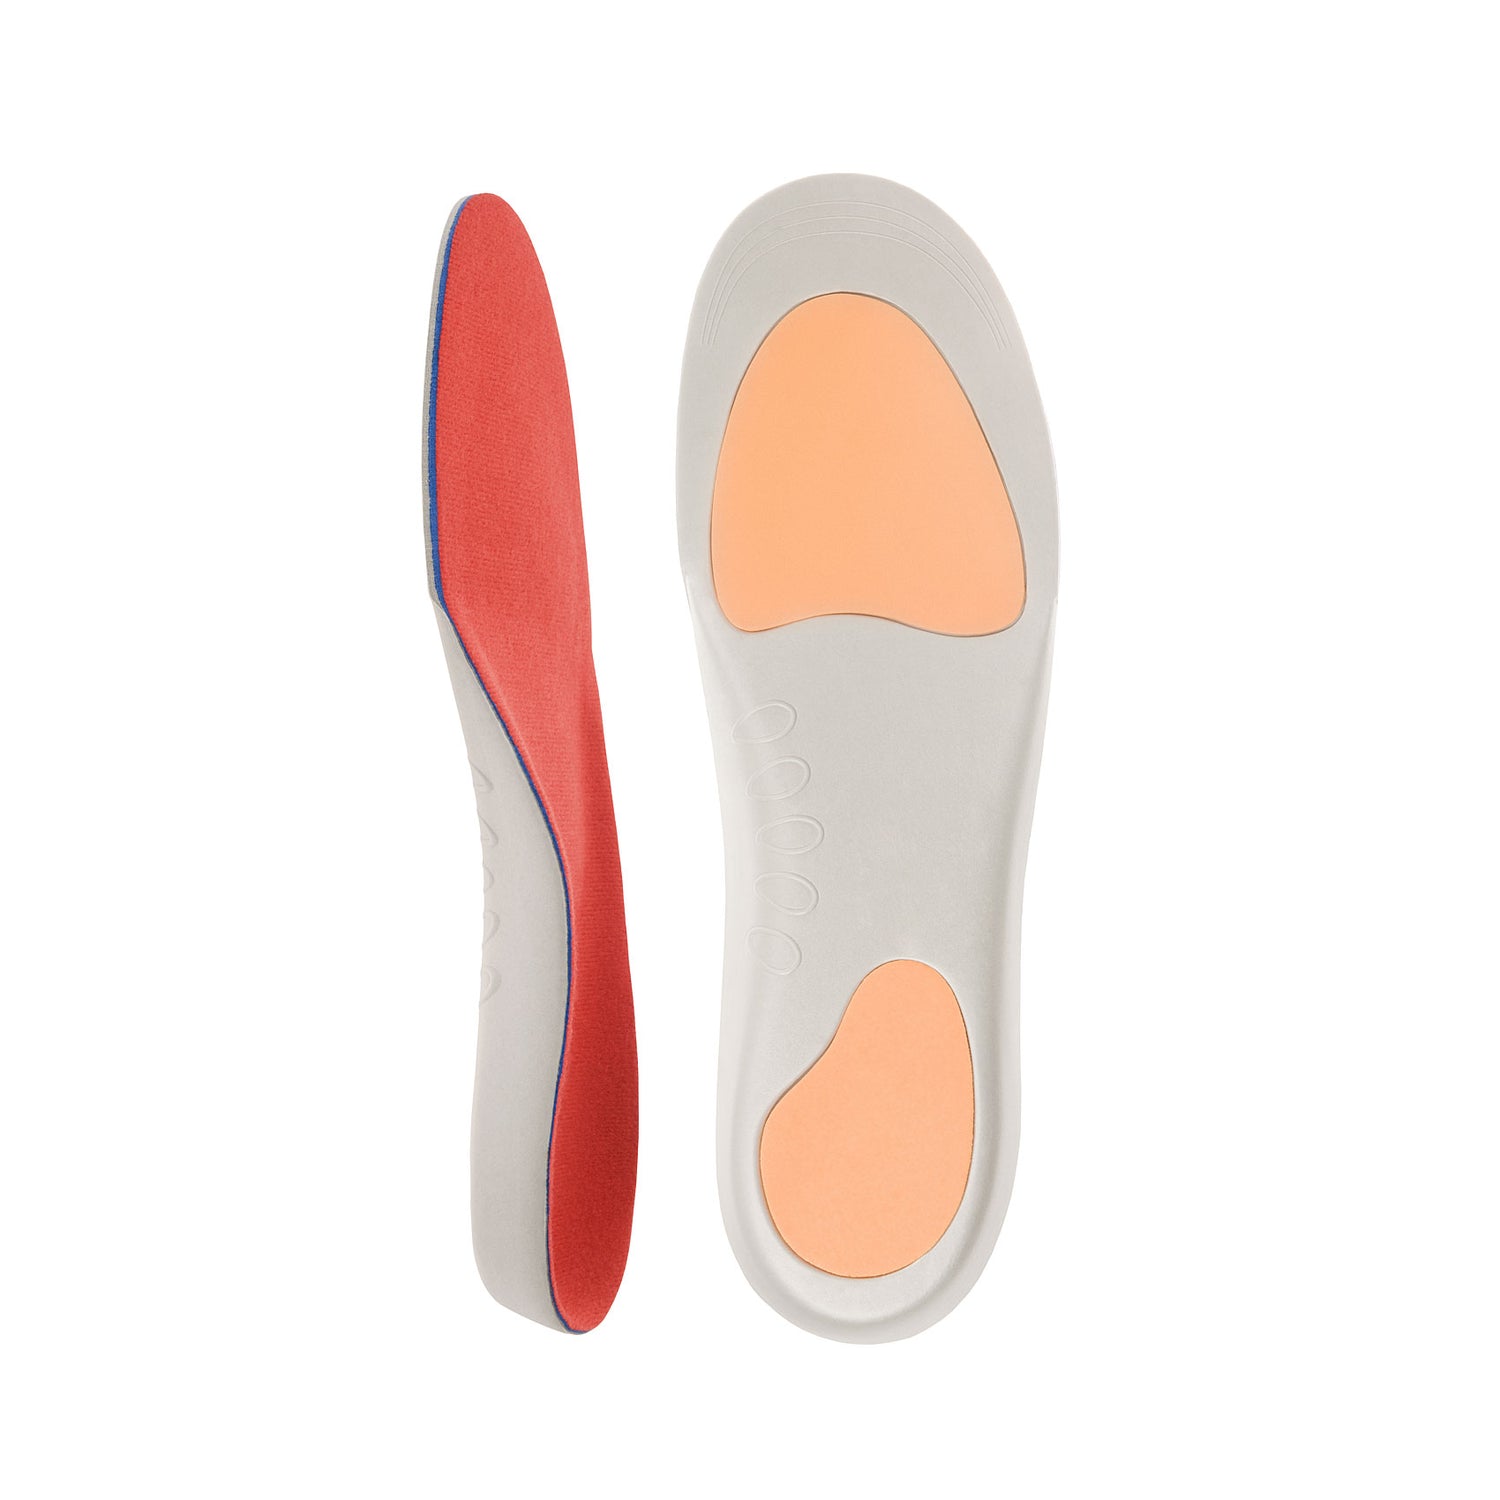 DJMed Orthotic - Shoe Insoles - Womens 11-13